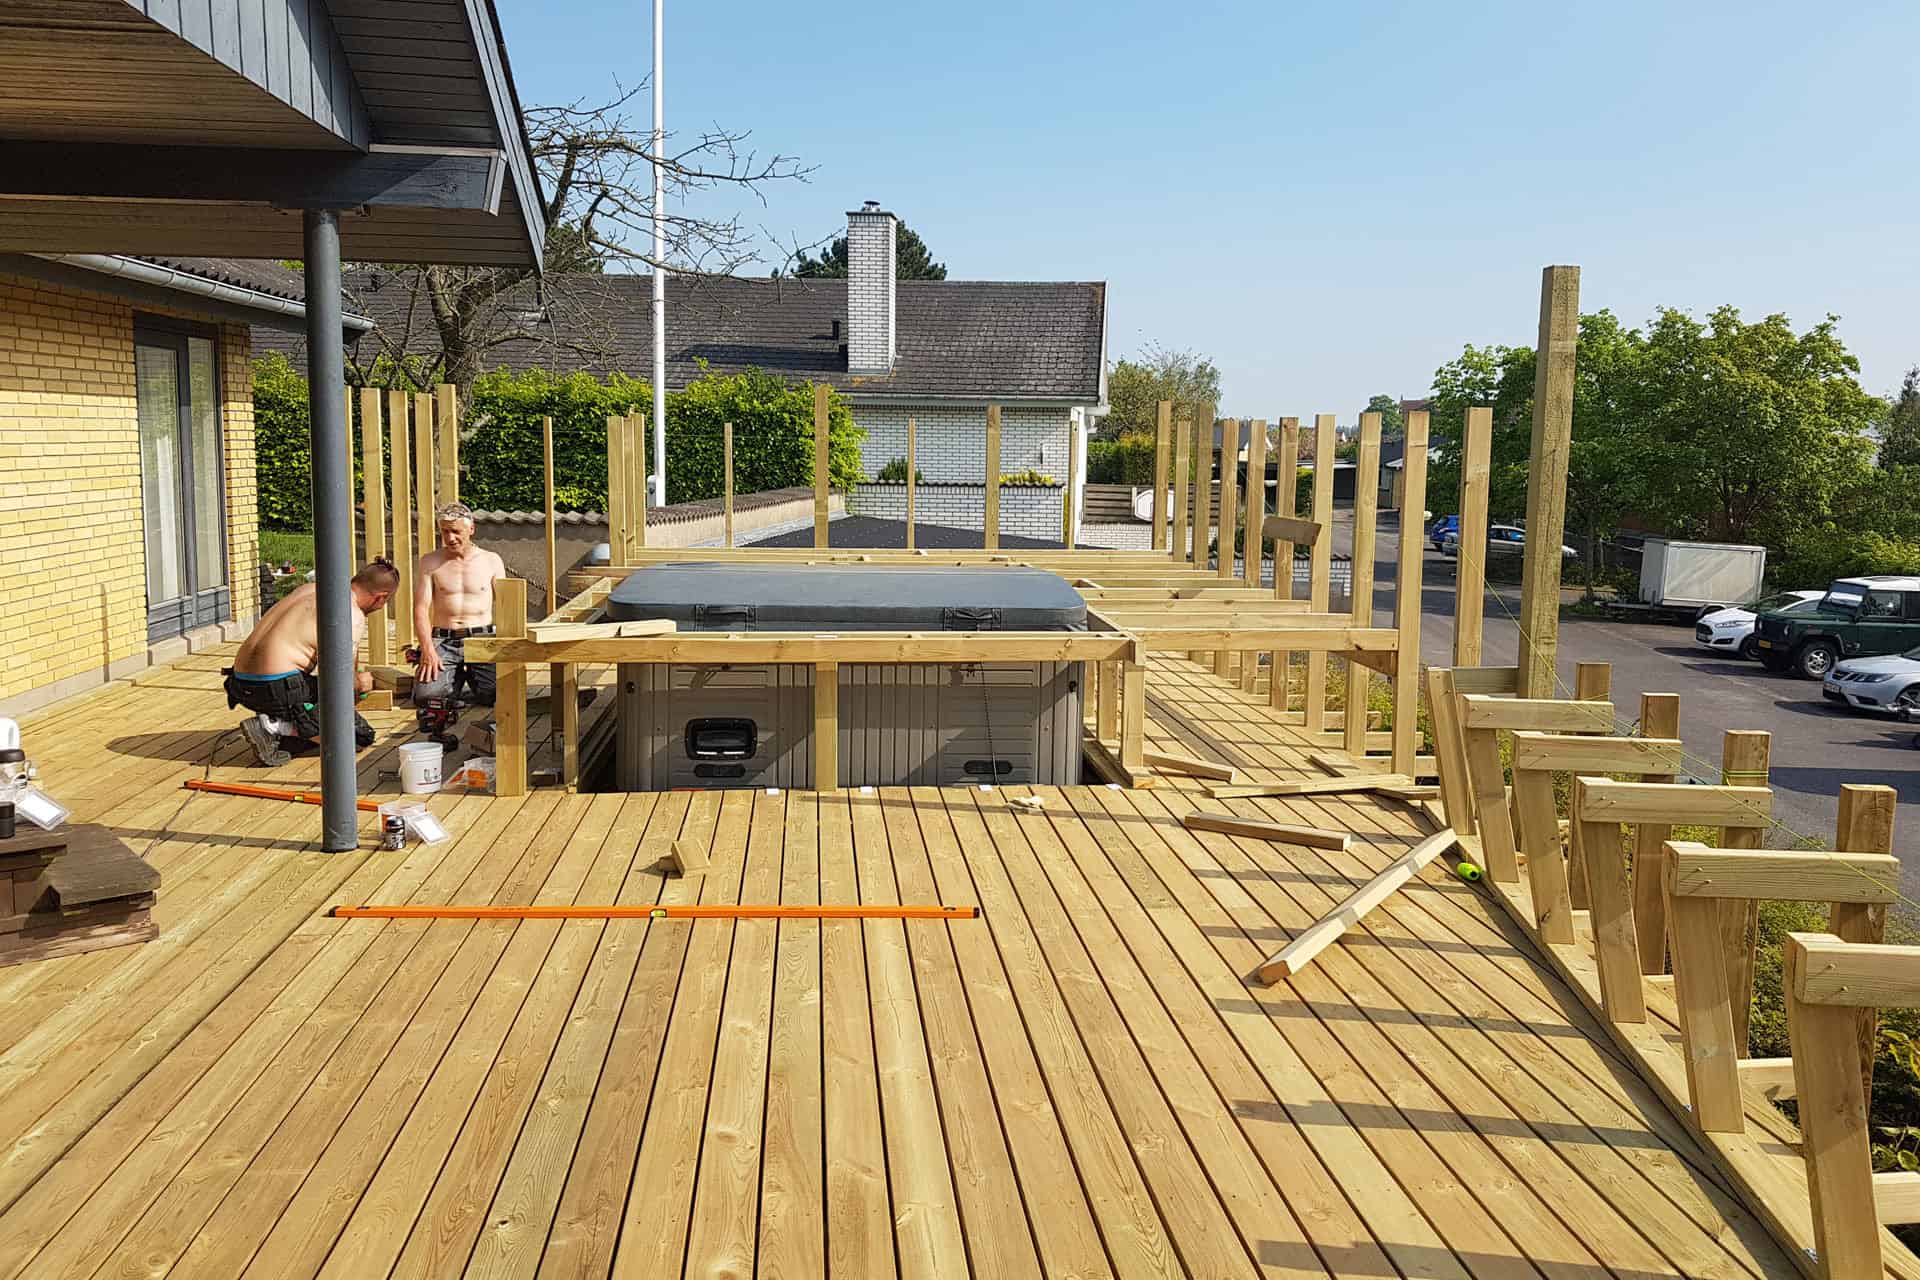 How to build a deck - decking